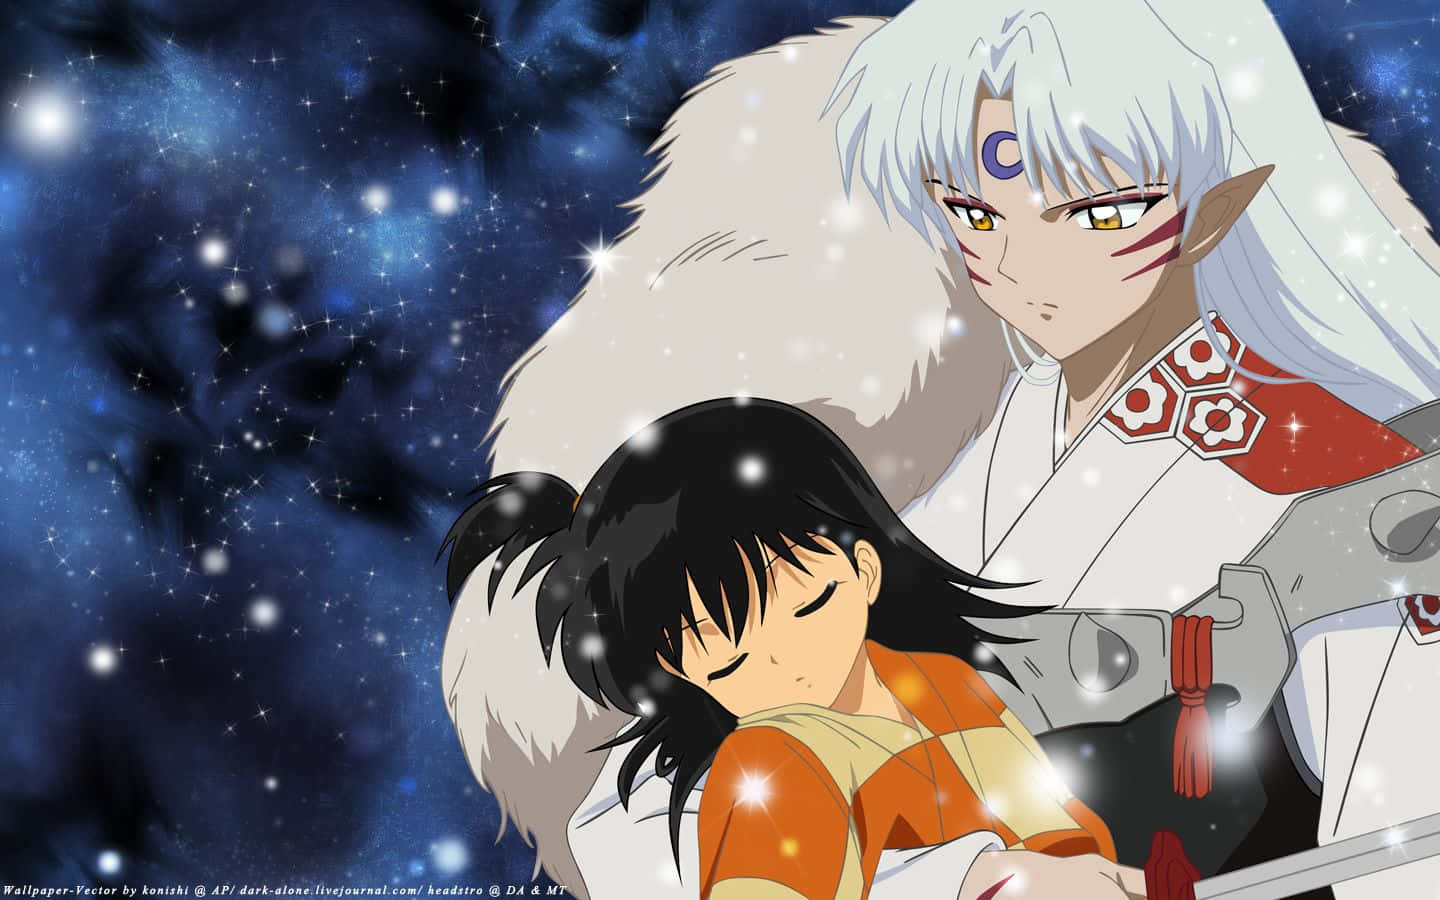 Inuyasha and Sesshomaru facing off against a vibrant sunset background Wallpaper